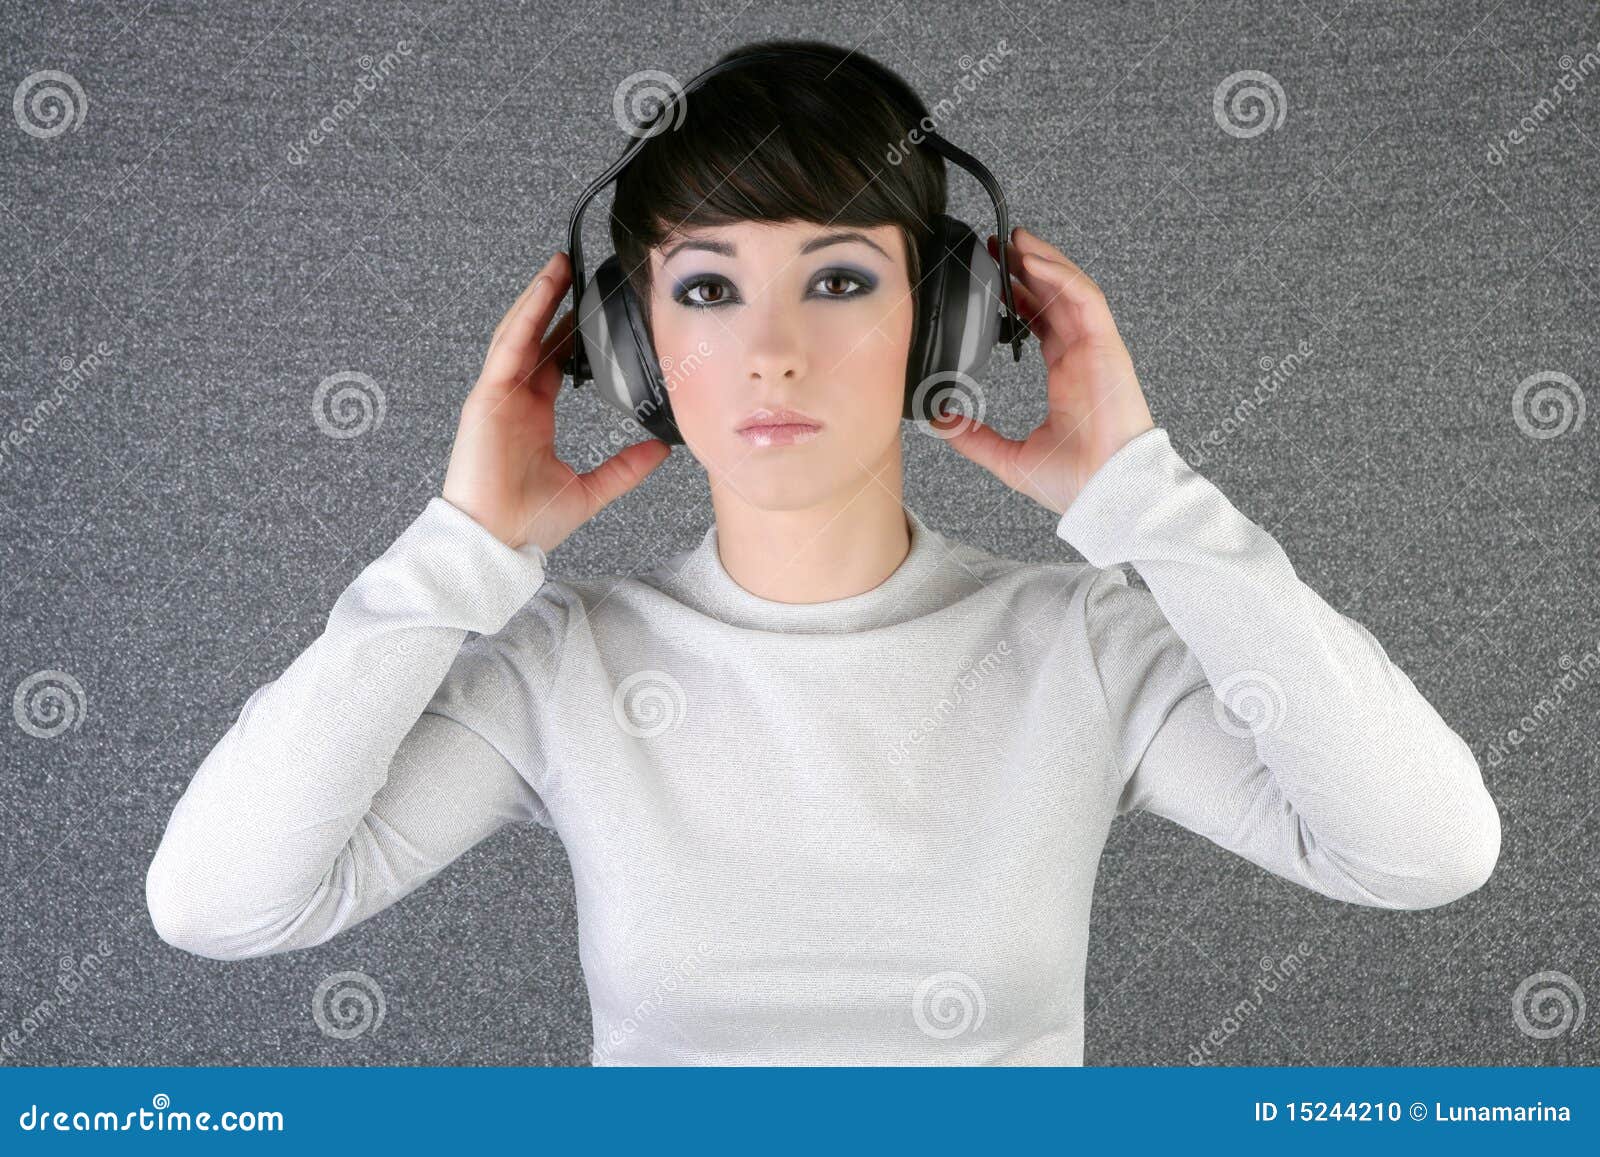 Futuristic Space Fashion Woman In Reflective Room. Stock Photo, Picture and  Royalty Free Image. Image 46911108.